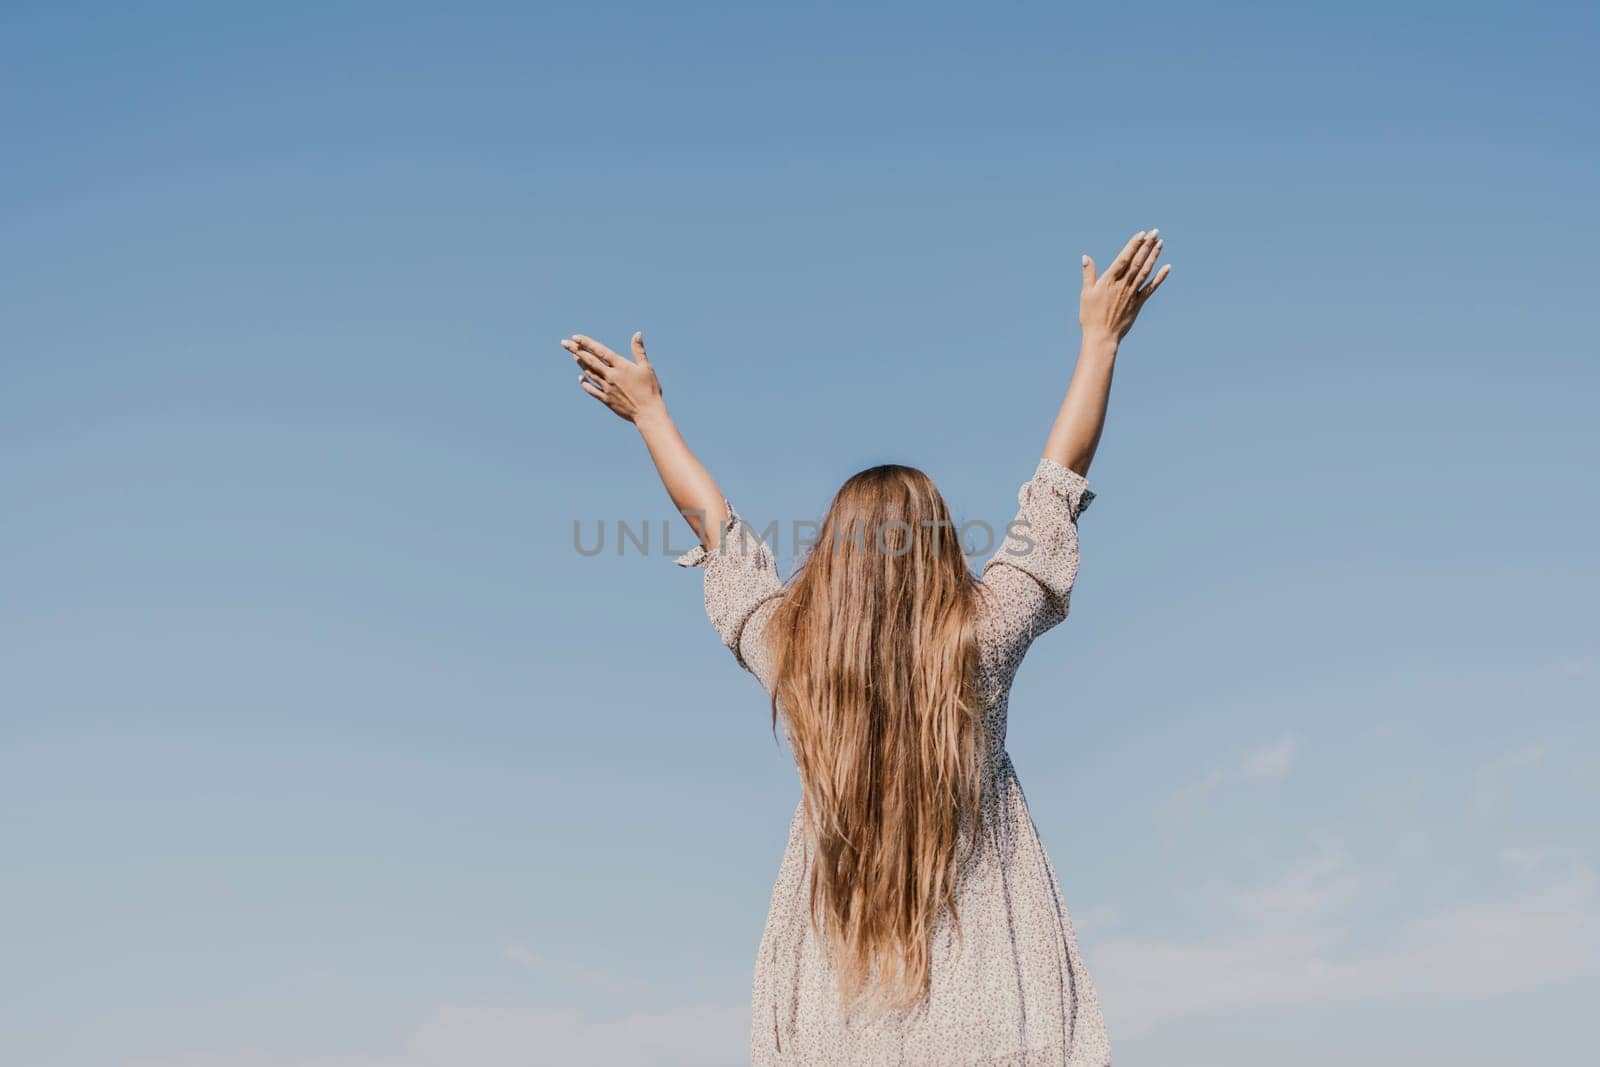 A woman with long hair is standing on the beach, looking up at the sky. She is wearing a dress and she is happy